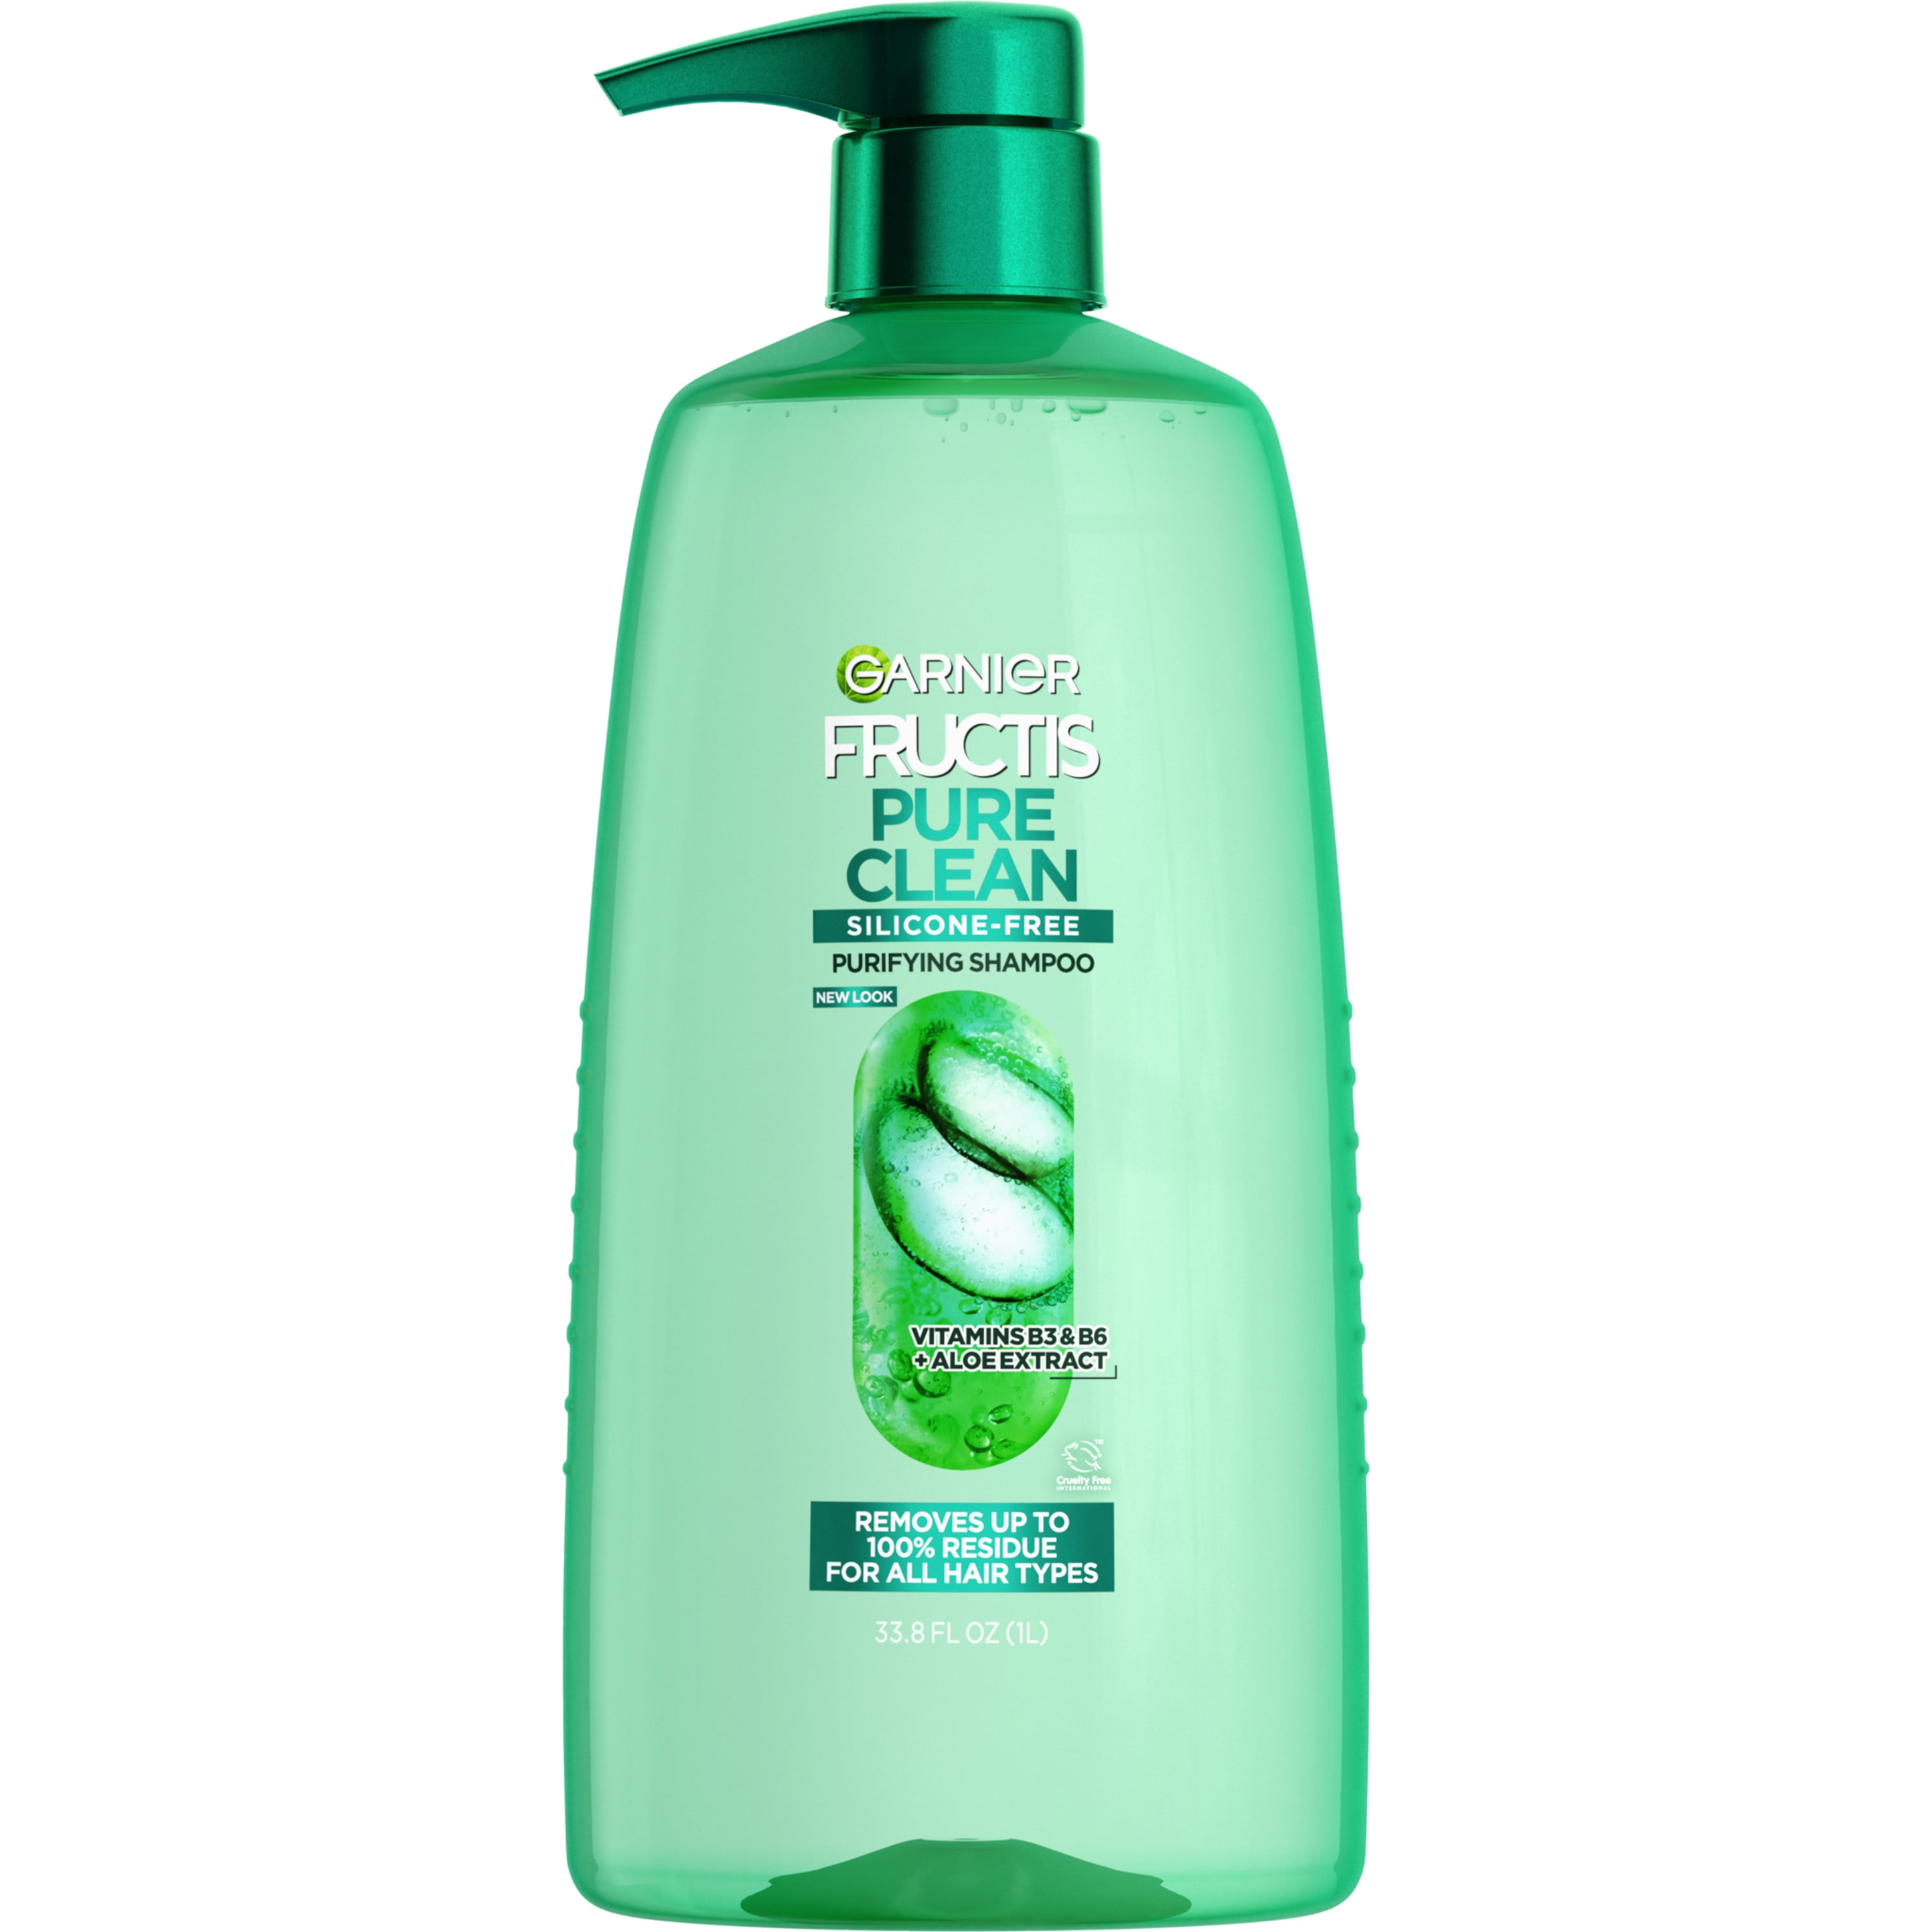 Garnier Fructis Pure Clean Fortifying Shampoo, Aloe and Vitamin E Extract, 33.8 fl oz